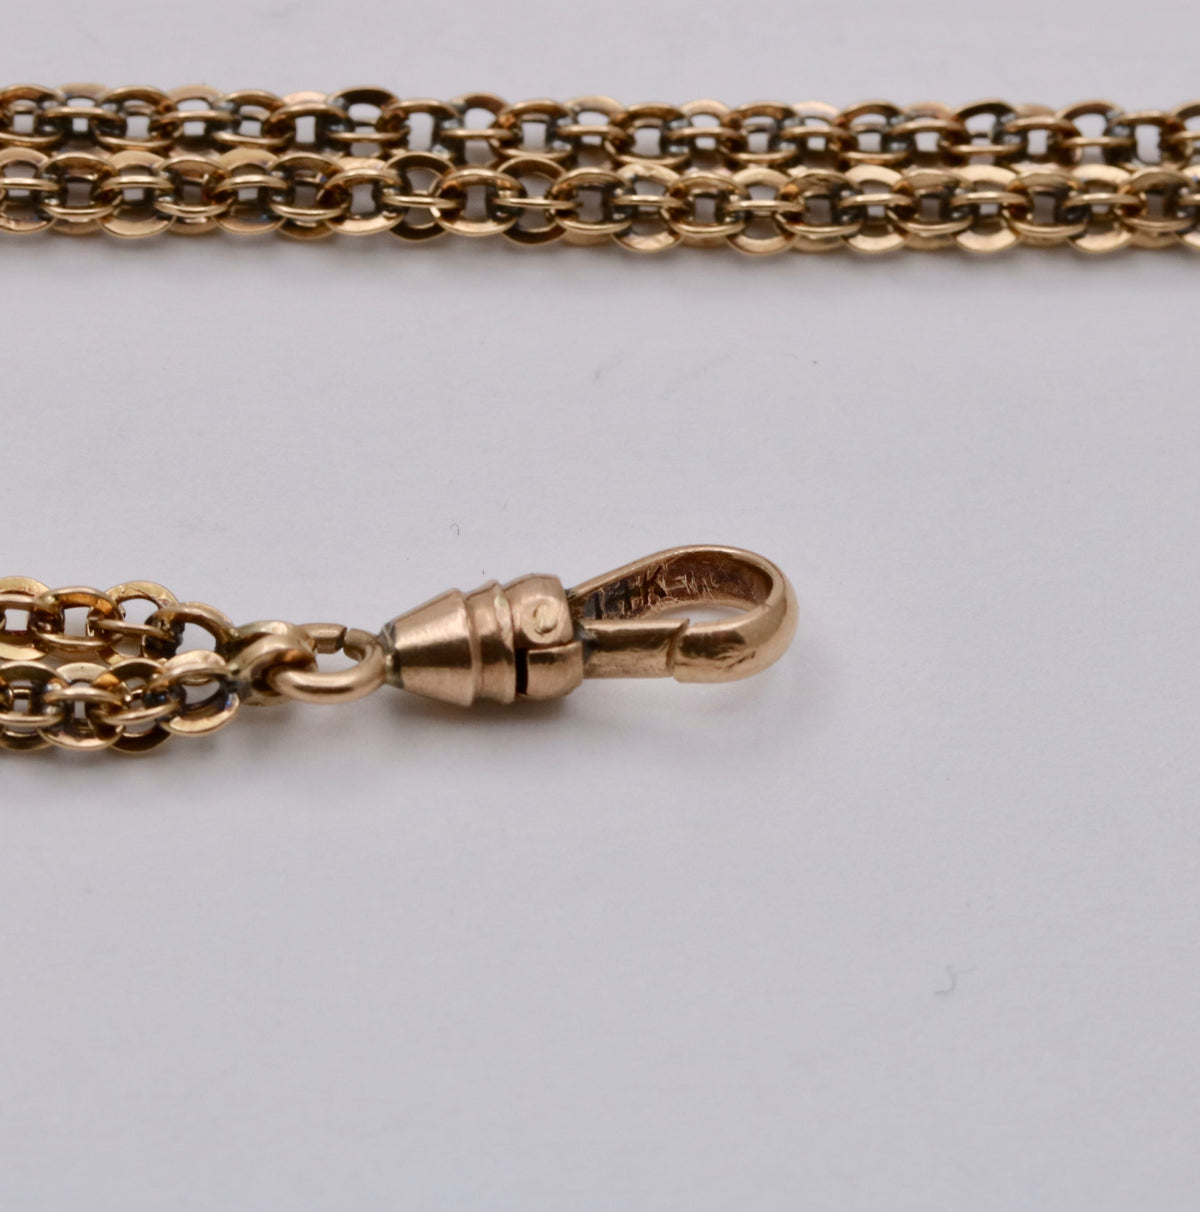 Antique Victorian Long Gold Chain, 55 Inches, in 14K #515000